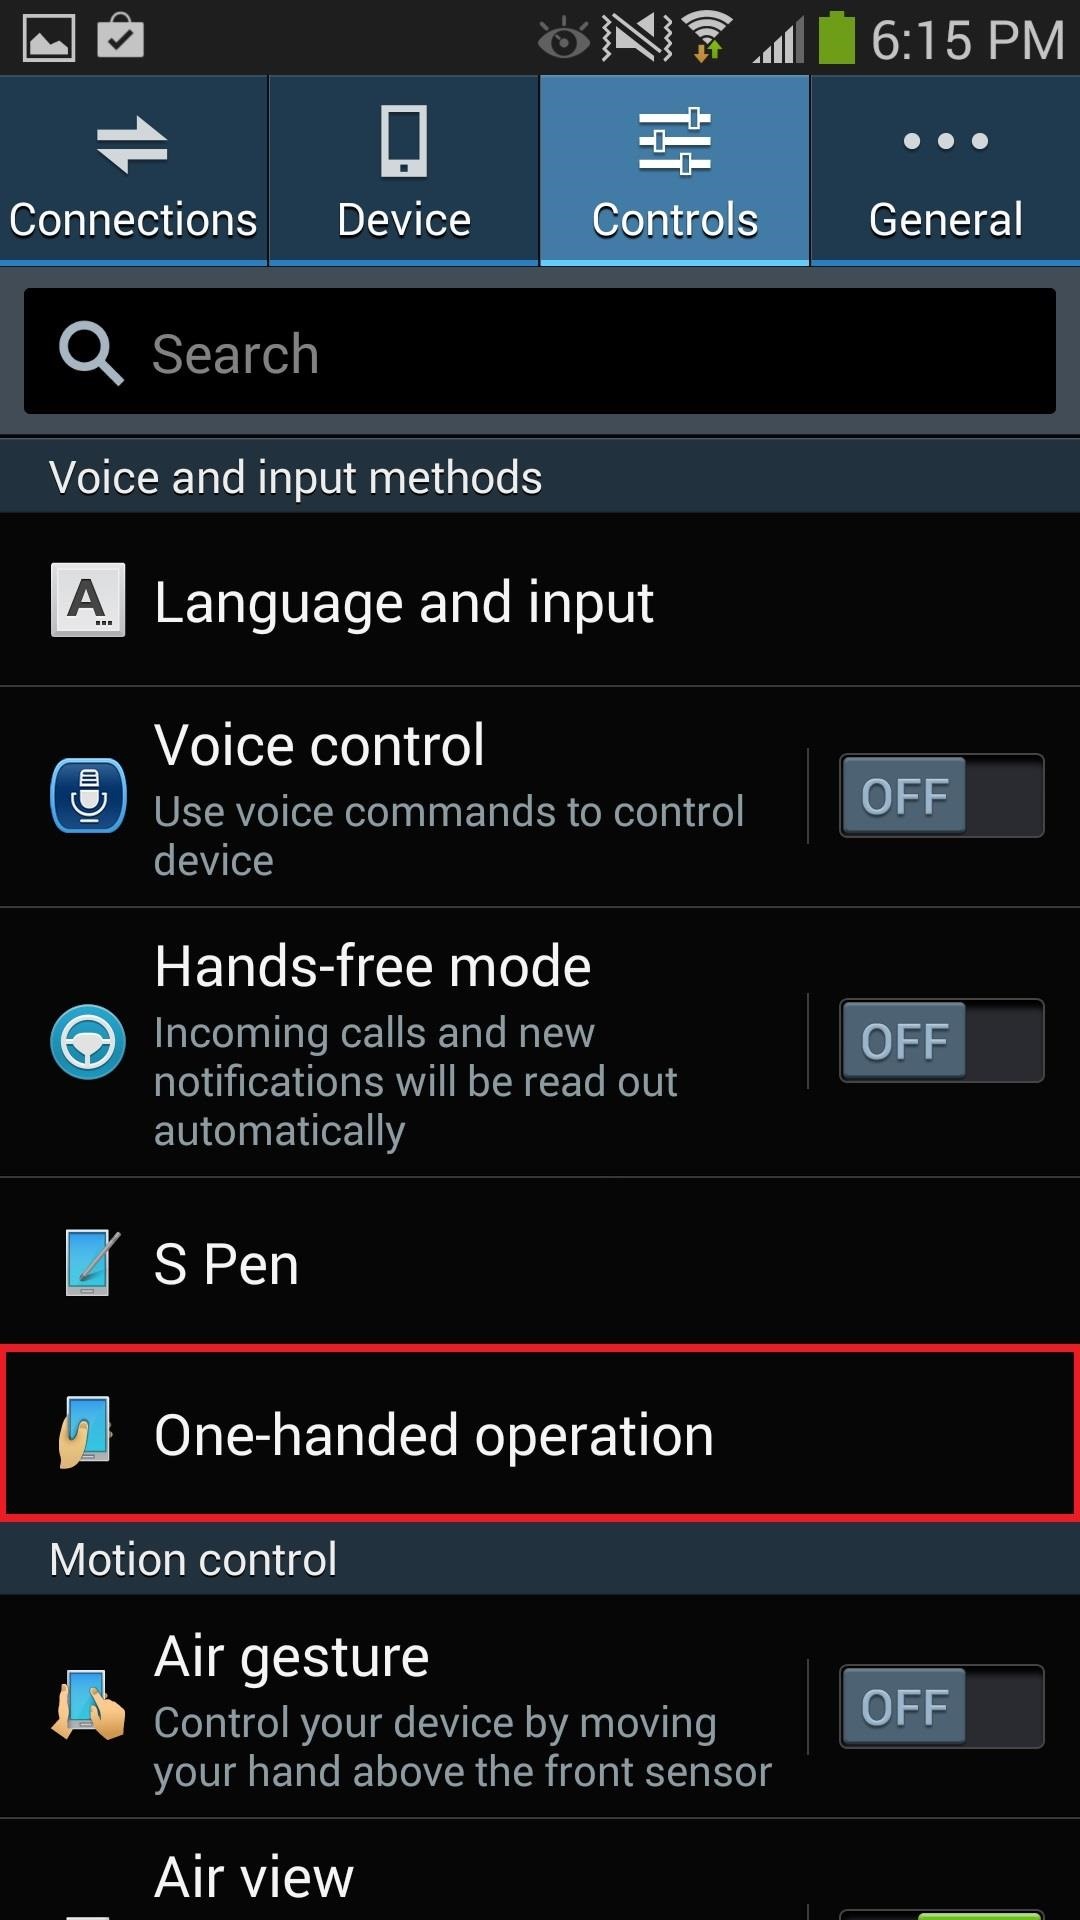 How to Make the Huge Samsung Galaxy Note 3 Easier to Use with Your One Tiny Little Hand